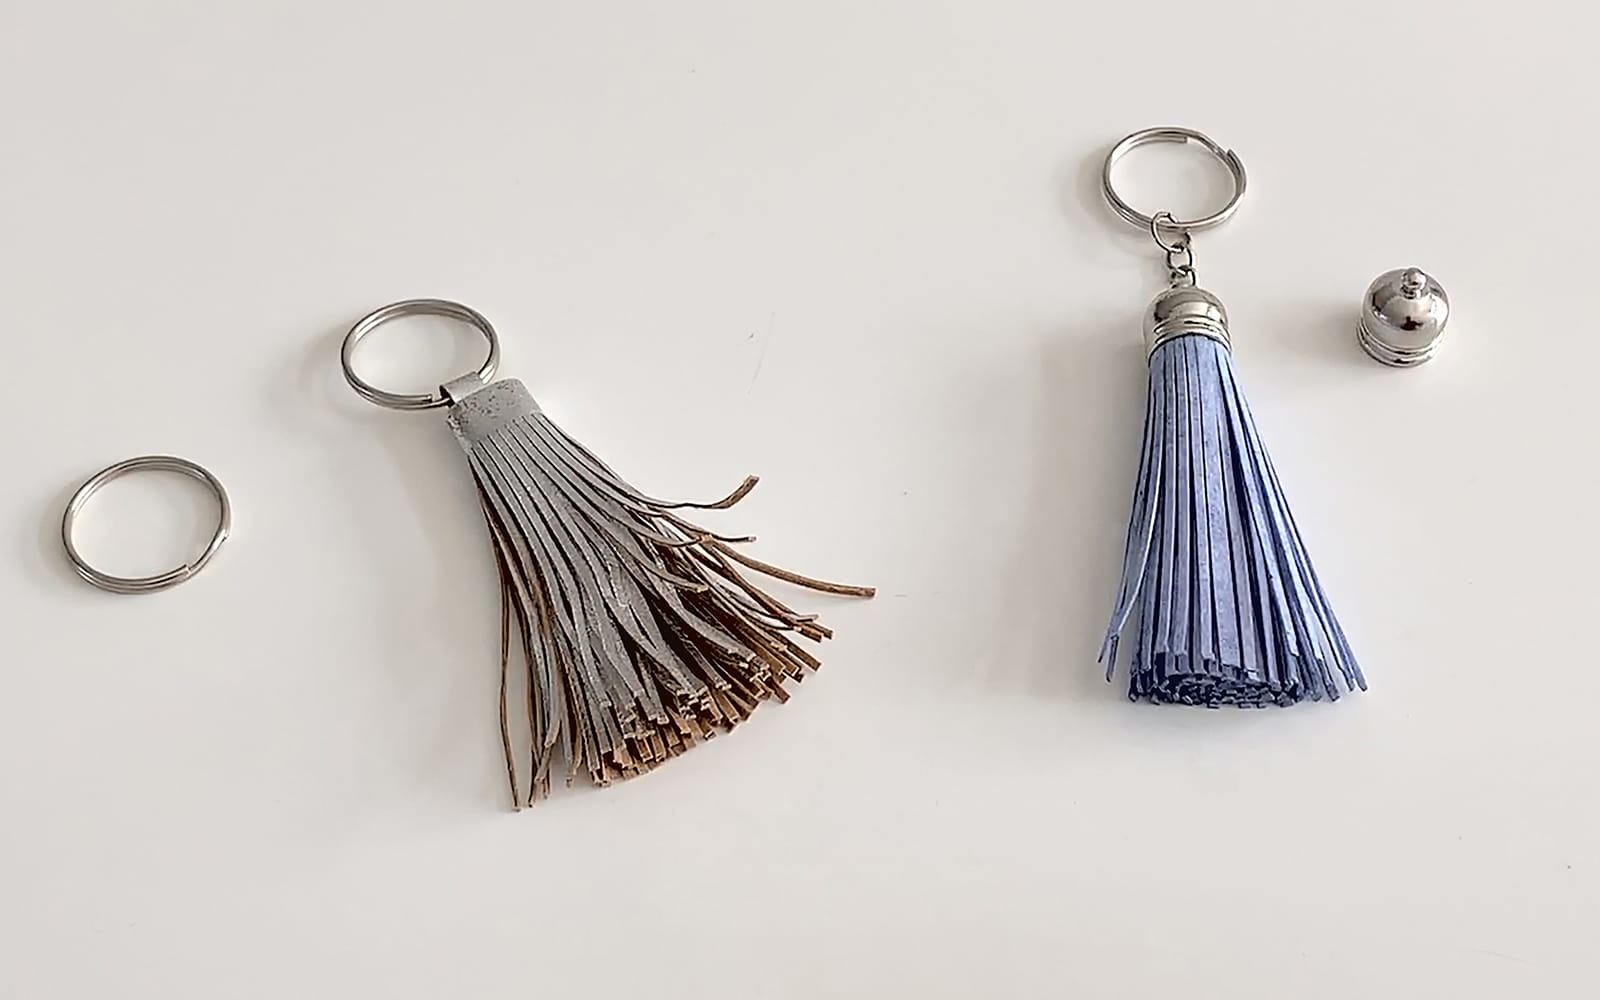 a silver and a blue tasselled key ring next to each other